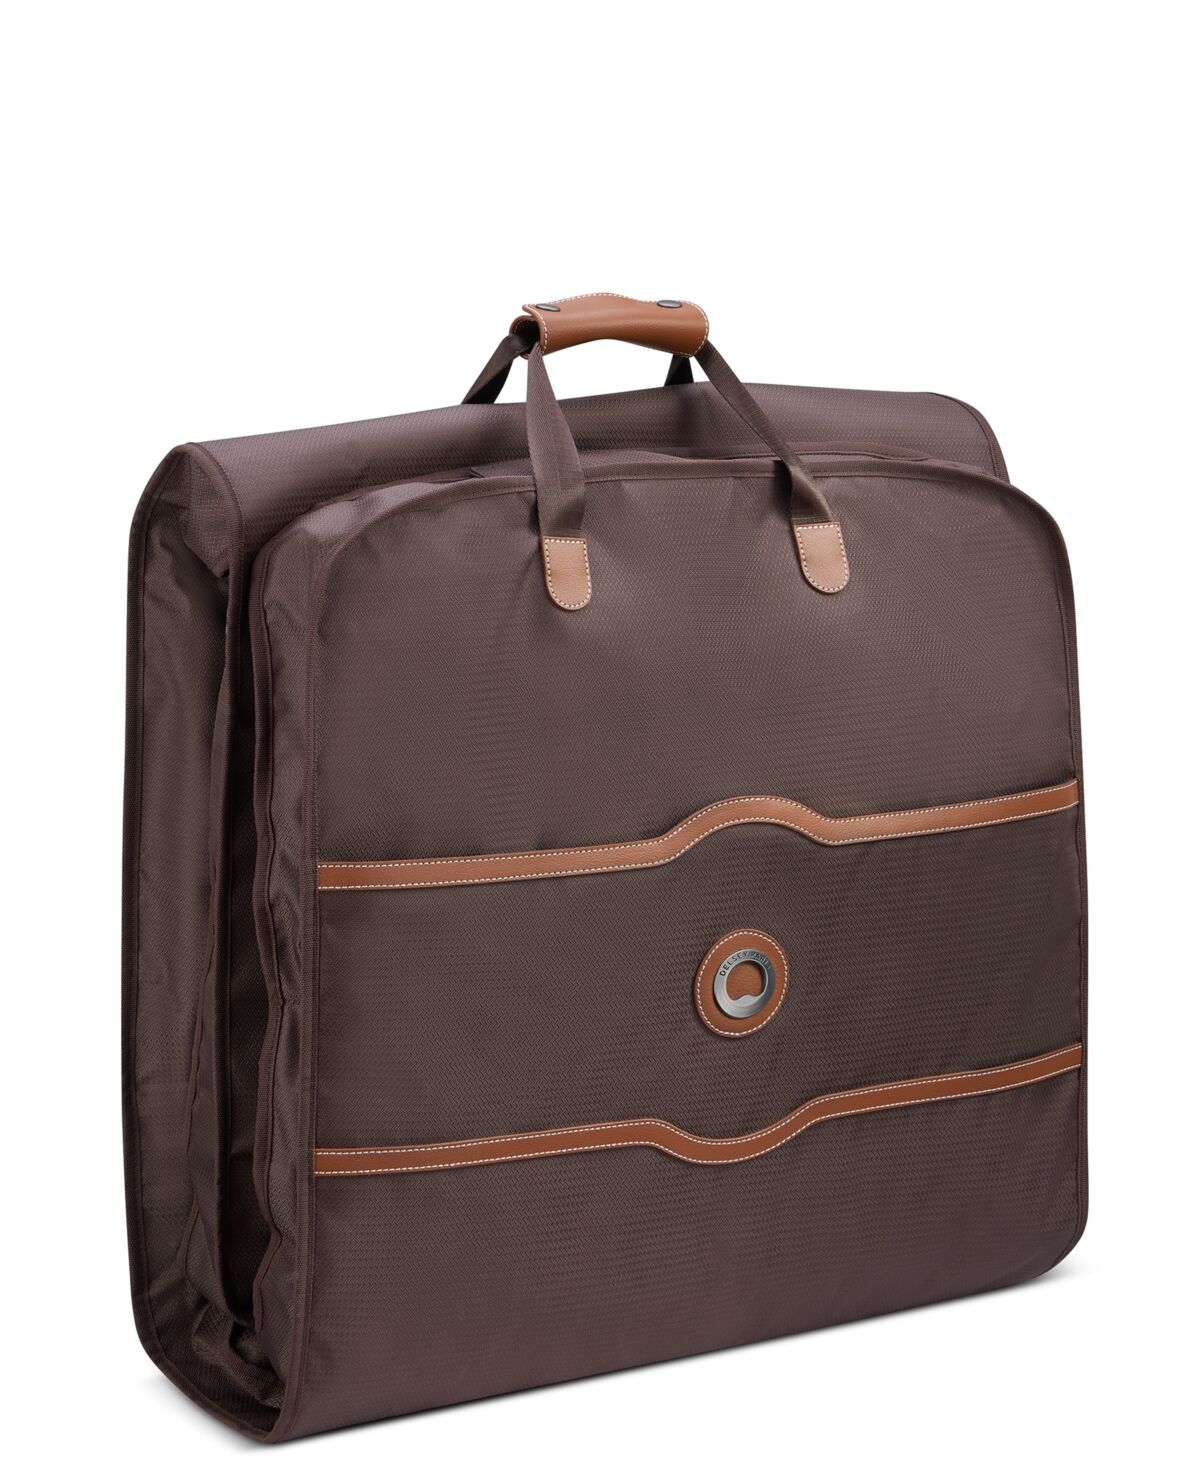 Delsey Chatelet Air 2.0 Garment Cover - Chocolate